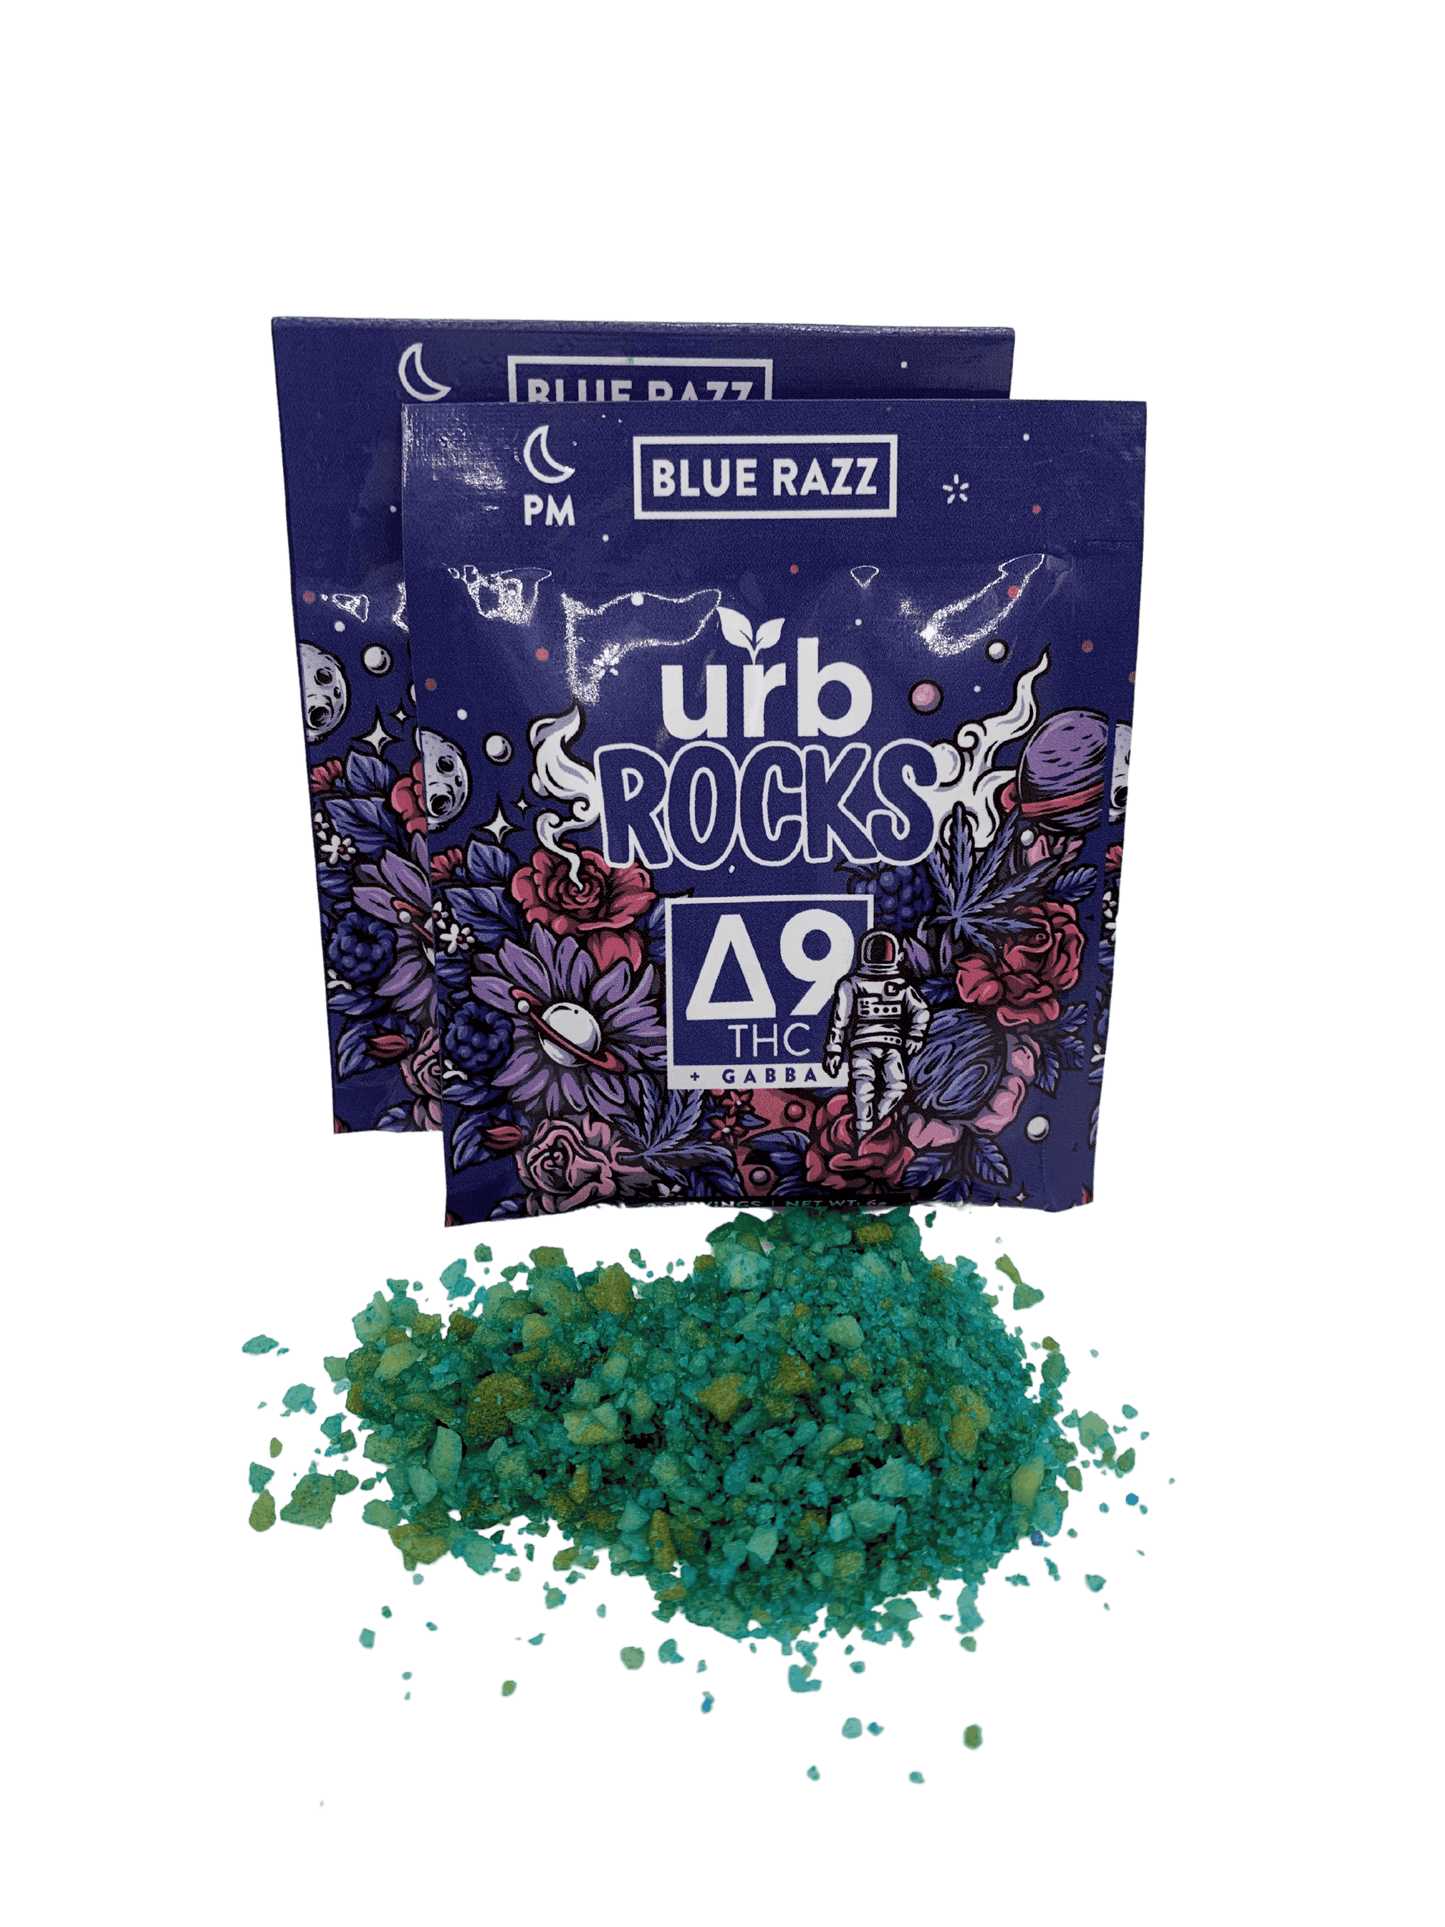 Delta 9 Urb Rocks 2 Servings Per Pack yoga smokes yoga studio, delivery, delivery near me, yoga smokes smoke shop, find smoke shop, head shop near me, yoga studio, headshop, head shop, local smoke shop, psl, psl smoke shop, smoke shop, smokeshop, yoga, yoga studio, dispensary, local dispensary, smokeshop near me, port saint lucie, florida, port st lucie, lounge, life, highlife, love, stoned, highsociety. Yoga Smokes Blue Razz PM